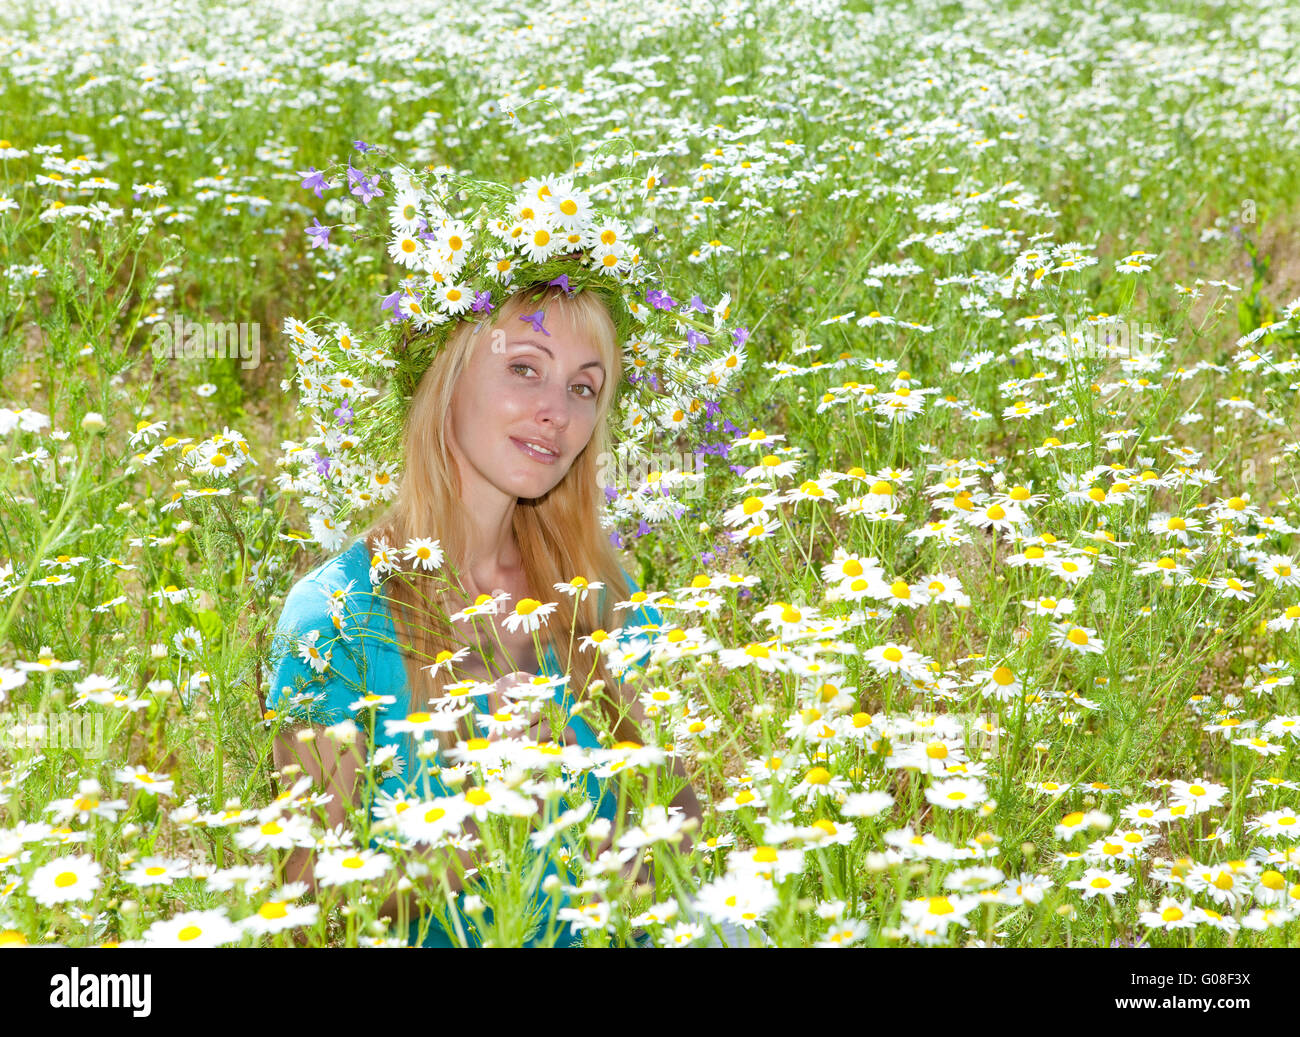 happy young woman in a wreath from wild flowers Stock Photo